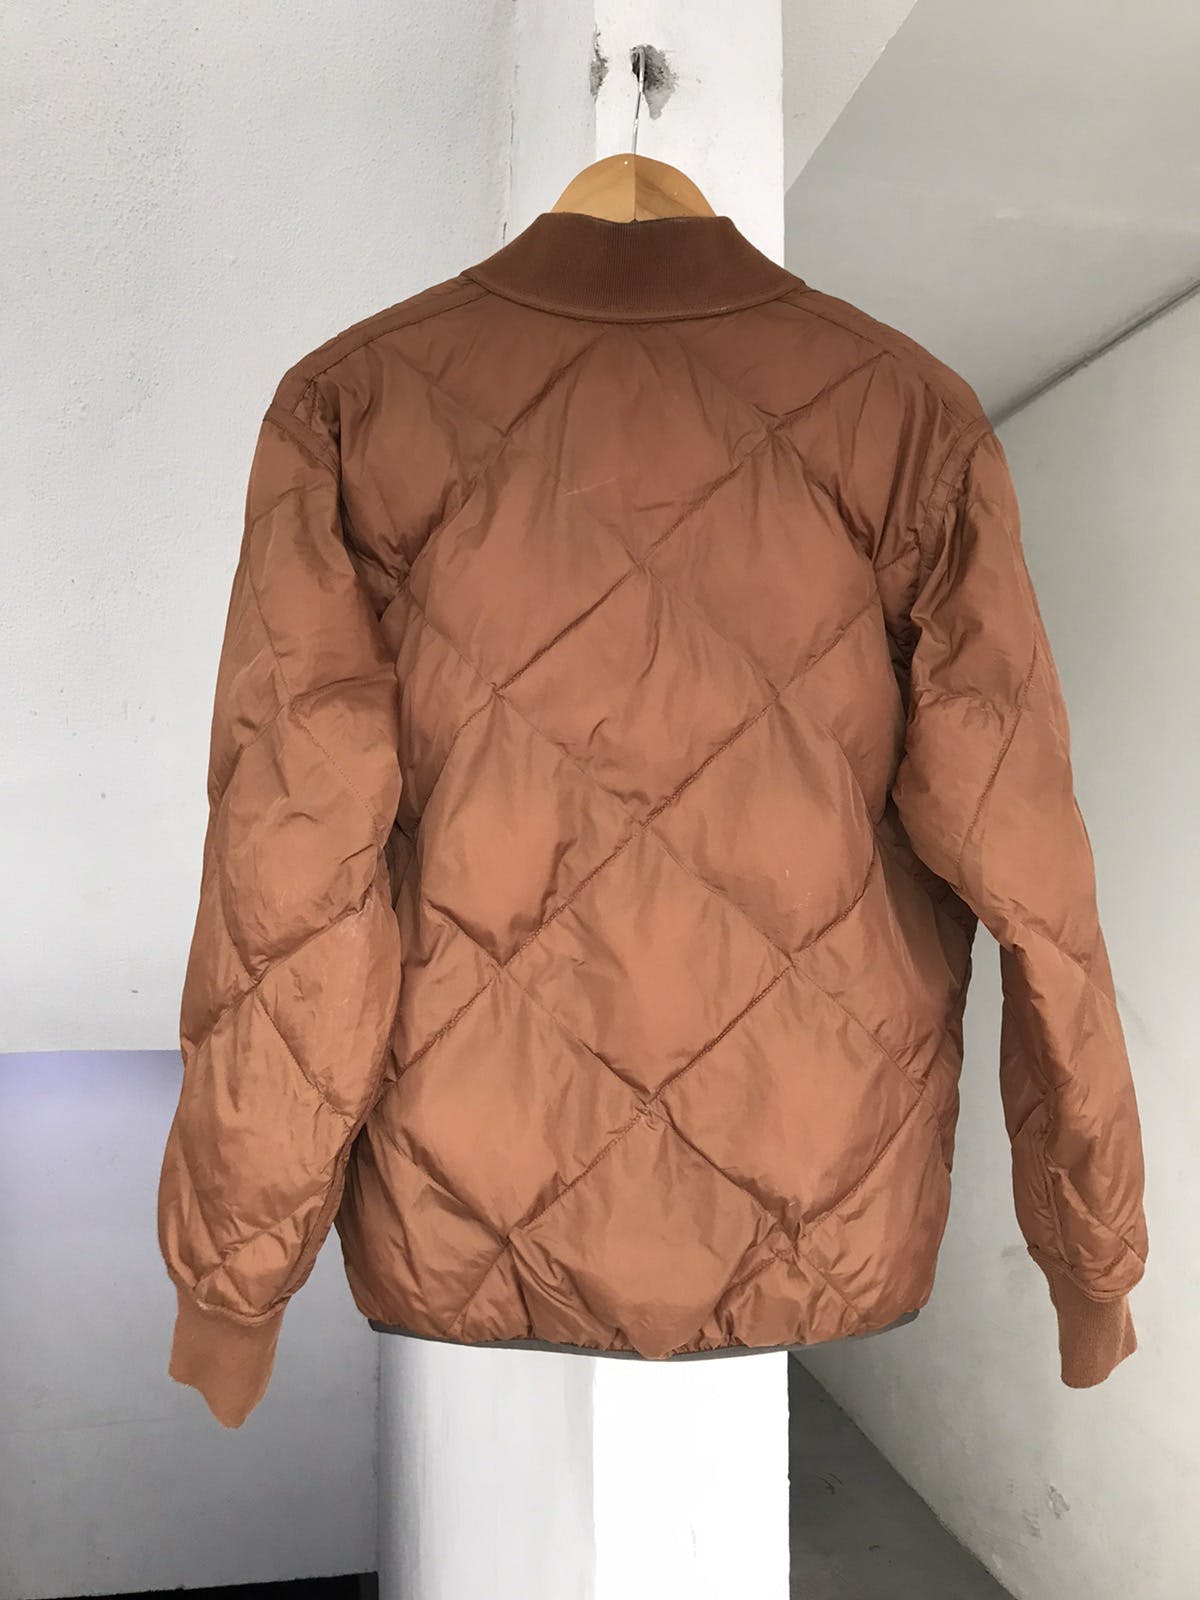 Christopher lemaire x ut Riversible Purffer Jacket - 13